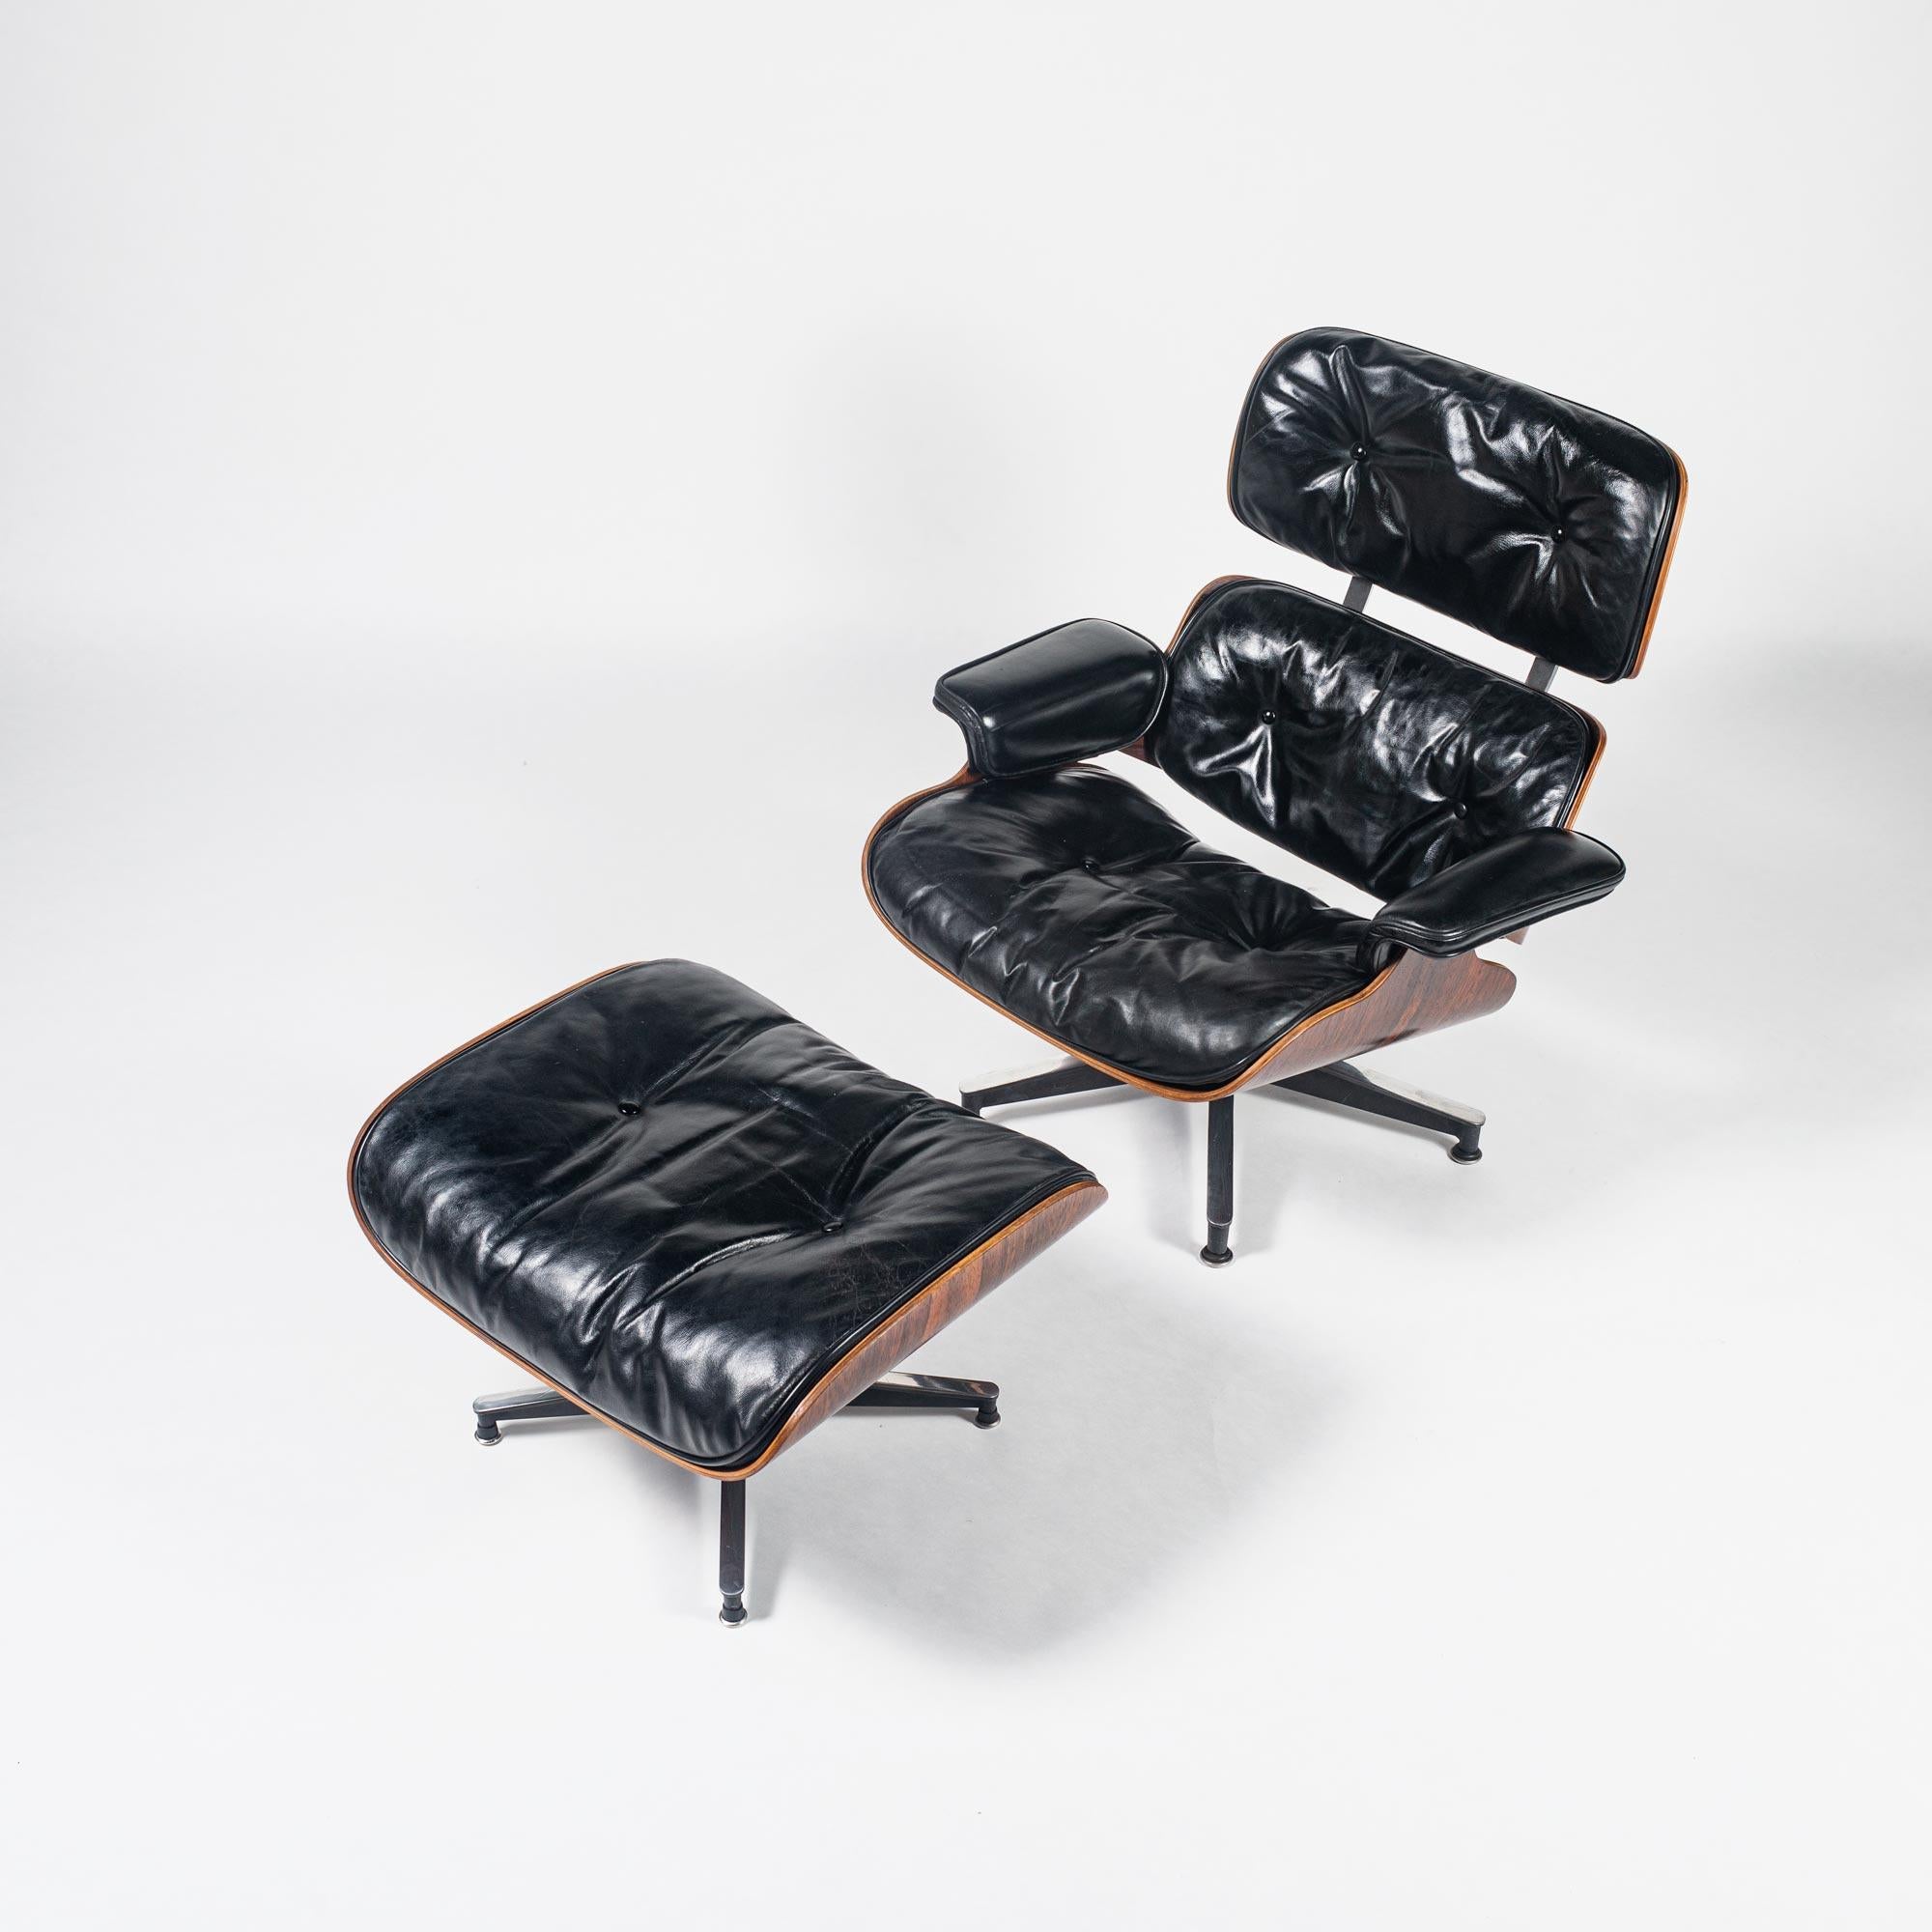 Rare collected 1956 Eames Lounge Chair with ottoman includes all the original details: -three screw armrests -down feather filled cushions -shell stamped number 82. New shock mounts, original leather with original down feather pillow re-fluffed. Two